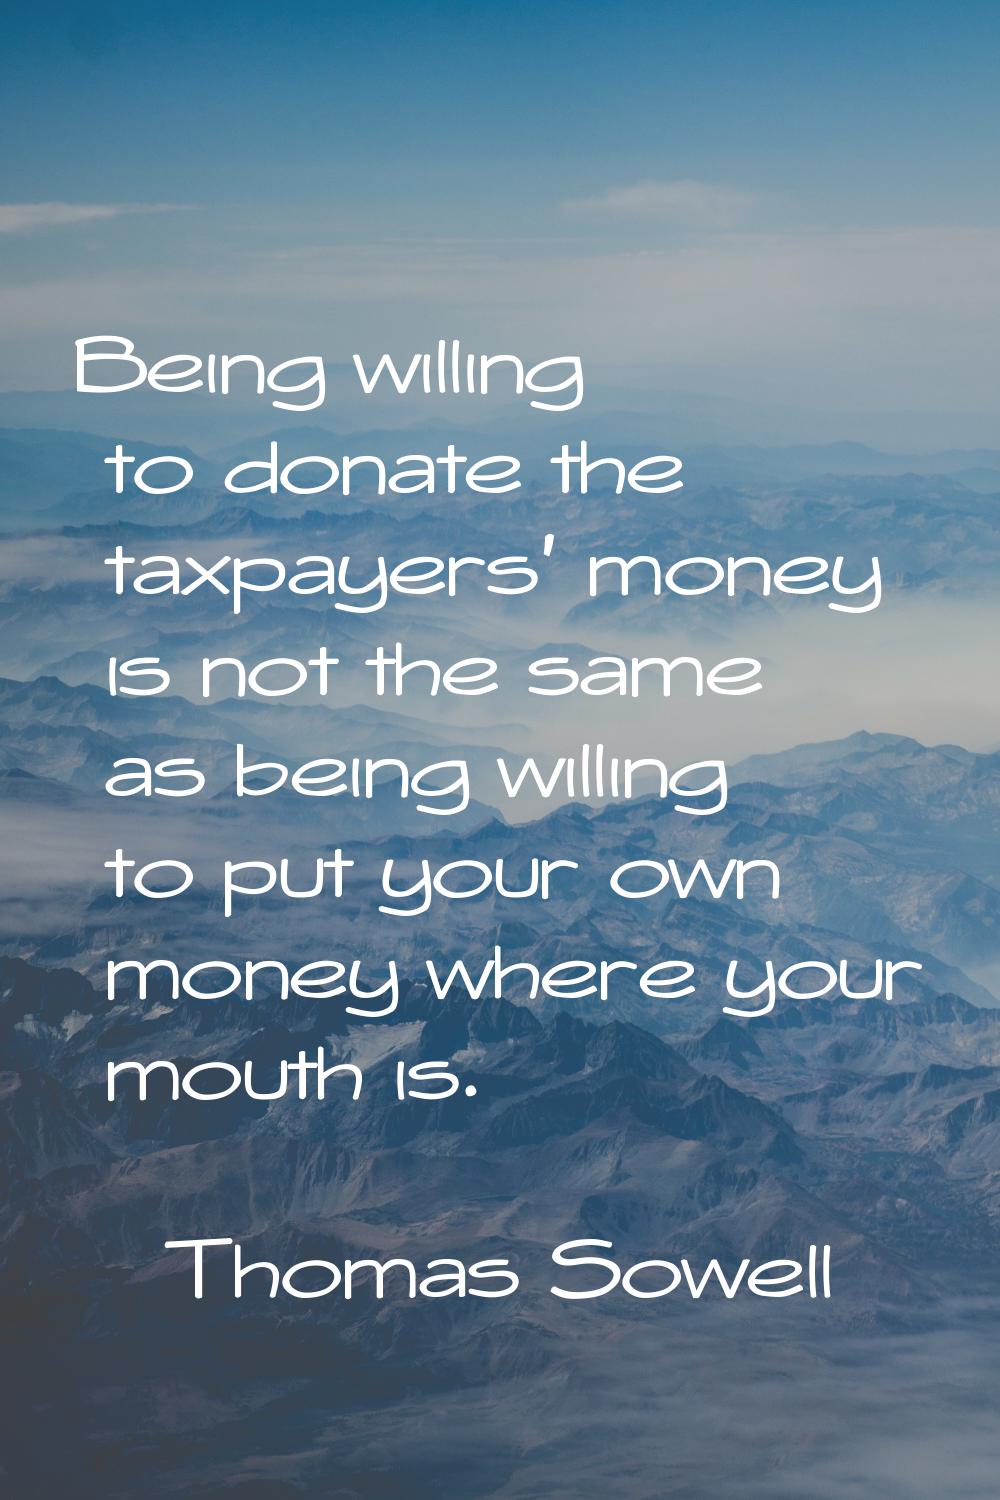 Being willing to donate the taxpayers' money is not the same as being willing to put your own money